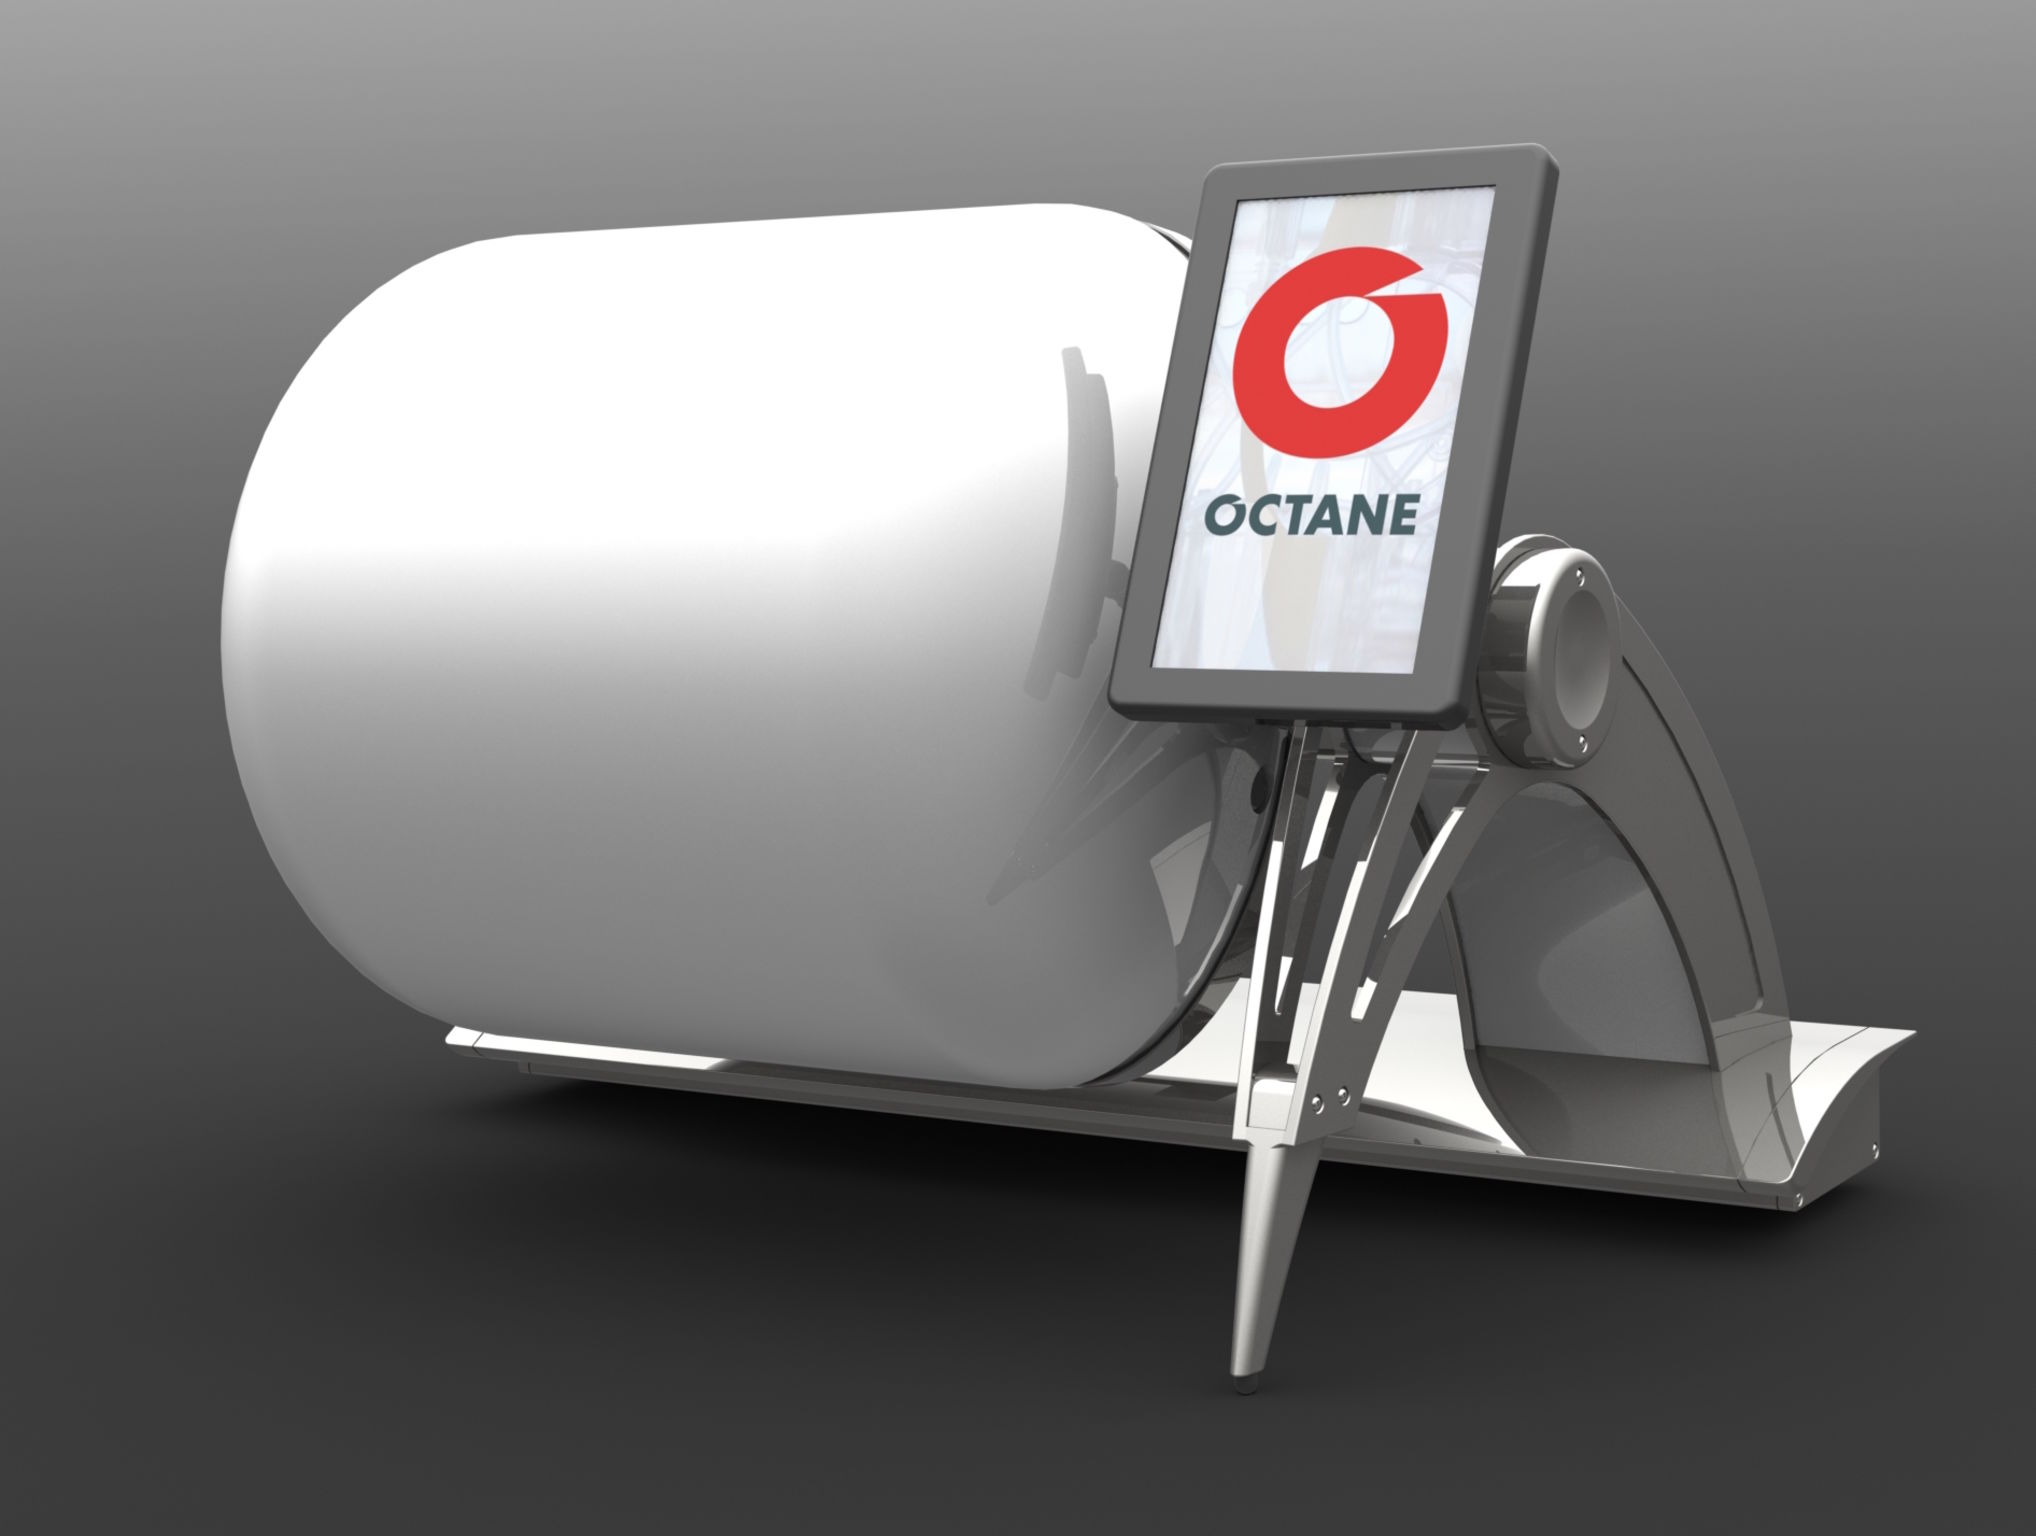 The Octane Cocoon